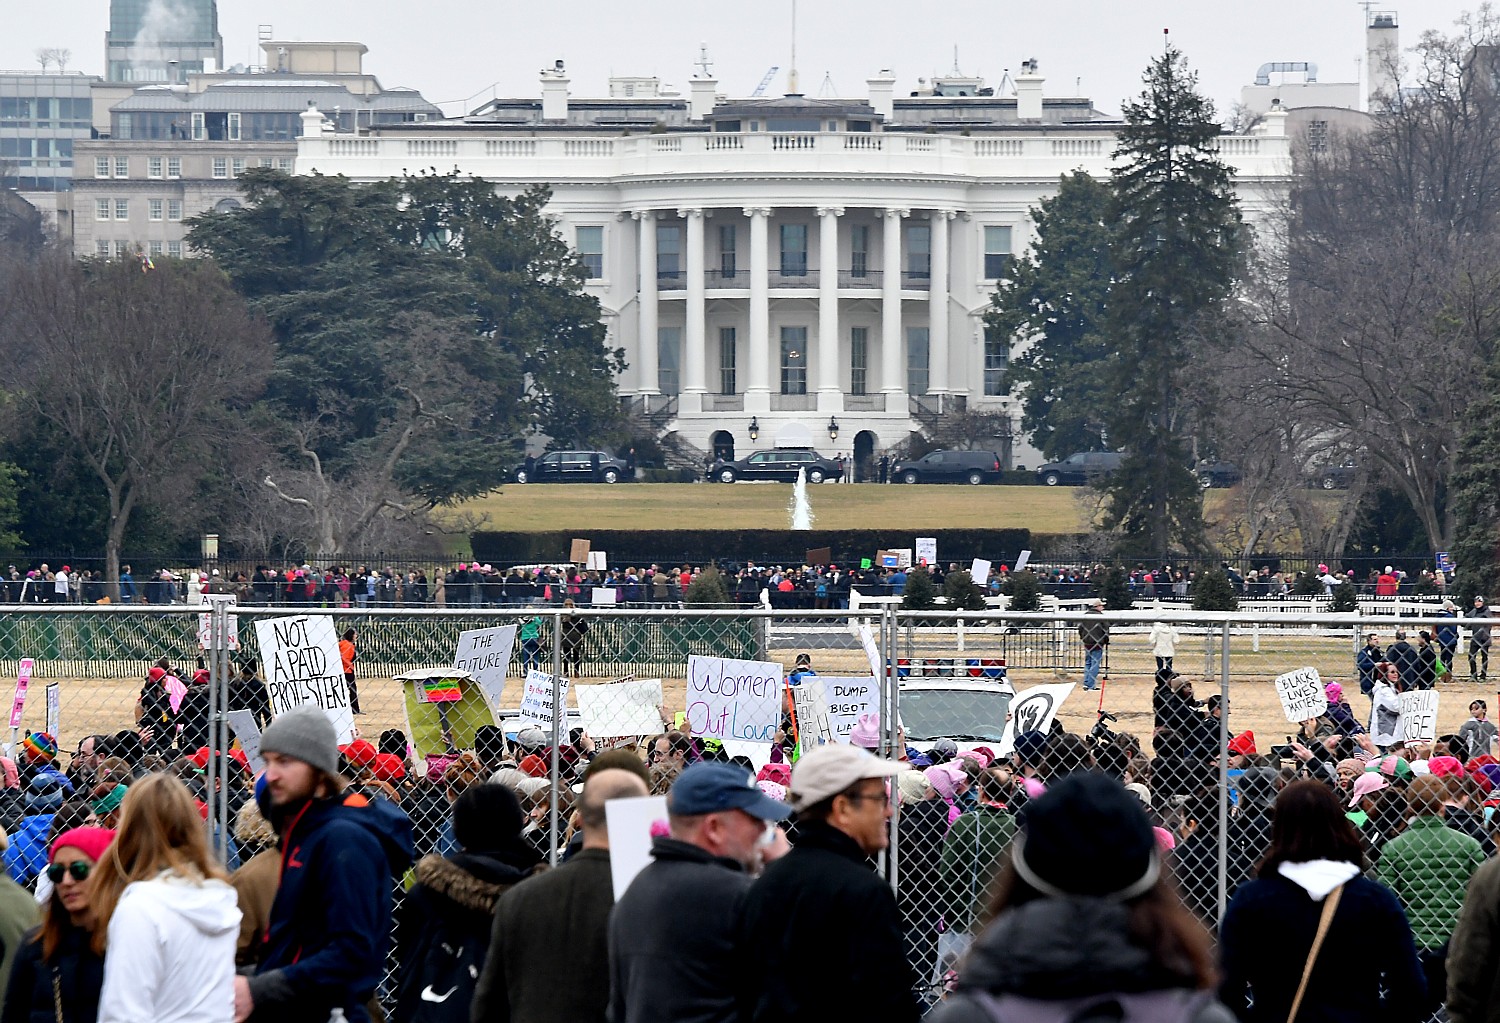 Women’s March Protesters kept at a distance from the White House on Saturday, Jan. 21, 2017. Many called for protecting the environment and climate. Donald Trump is dismissive, telling auto manufacturers that environmental regulations “are out of control.” © 2017 Karen Rubin/news-photos-features.com